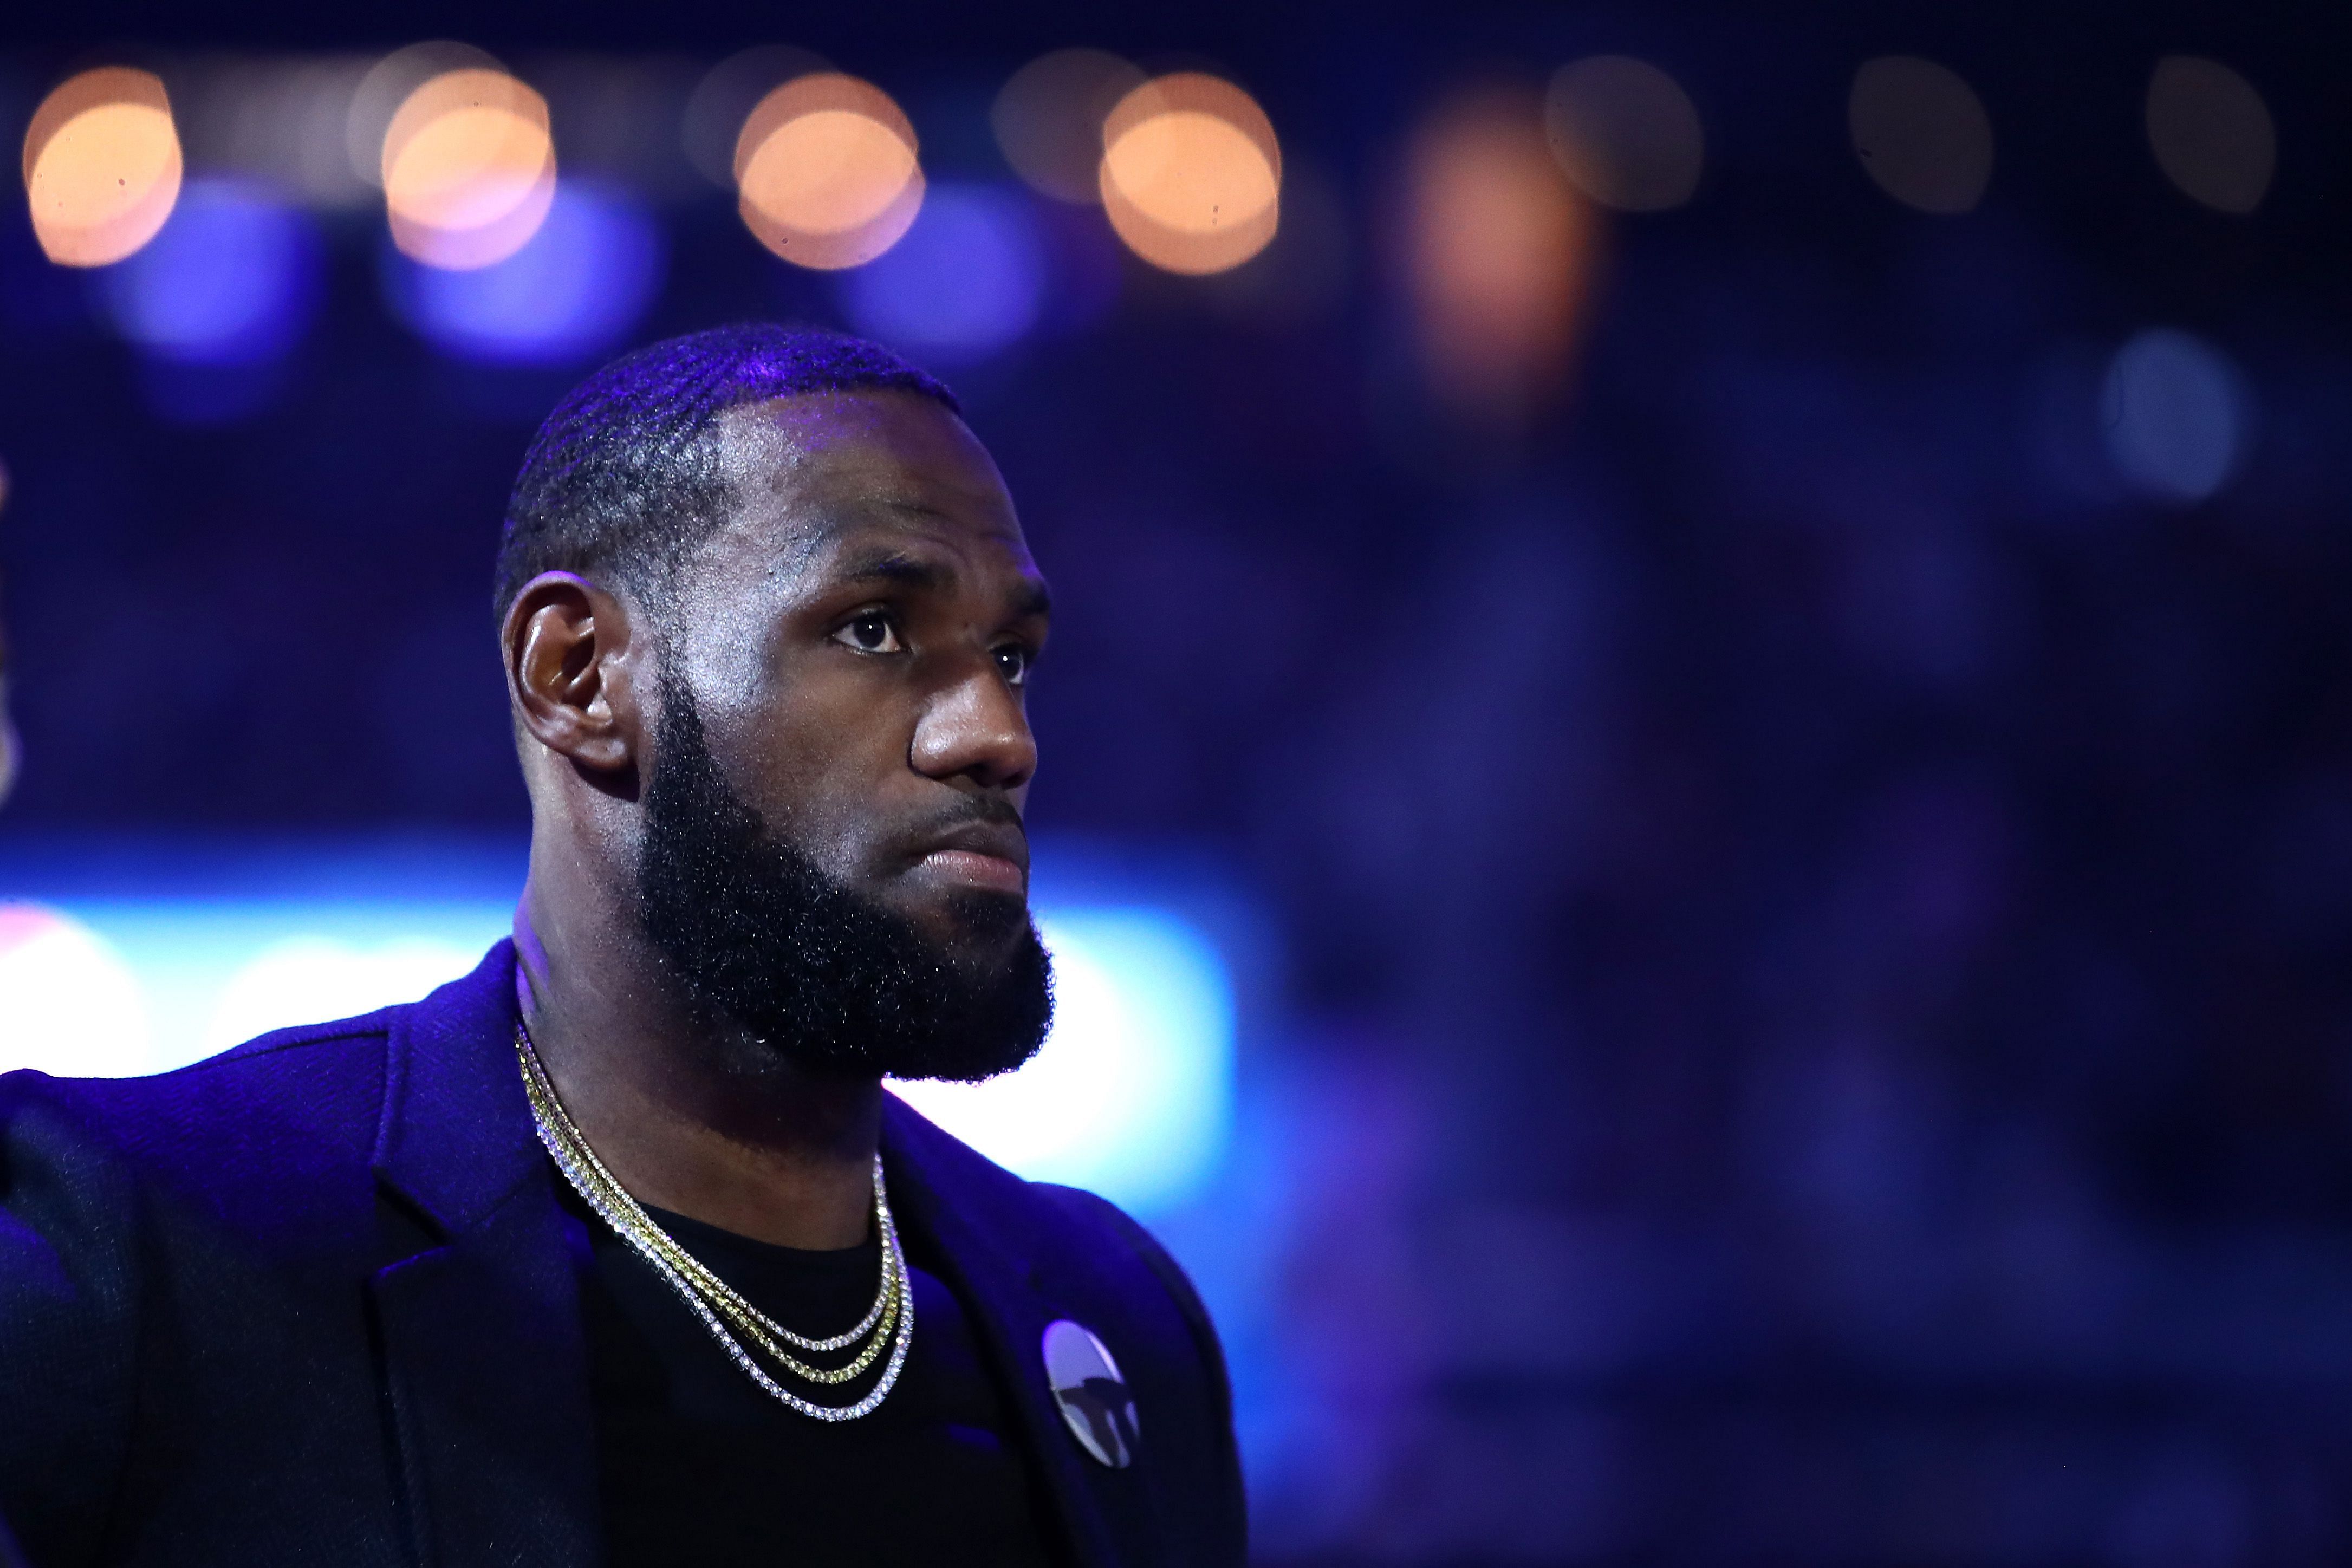 With barely 20 weeks before Americans cast their ballots, "King James" is making a foray into US politics to protect voting rights of blacks and upend what he calls a "structurally racist" system. Credit: AFP Photo